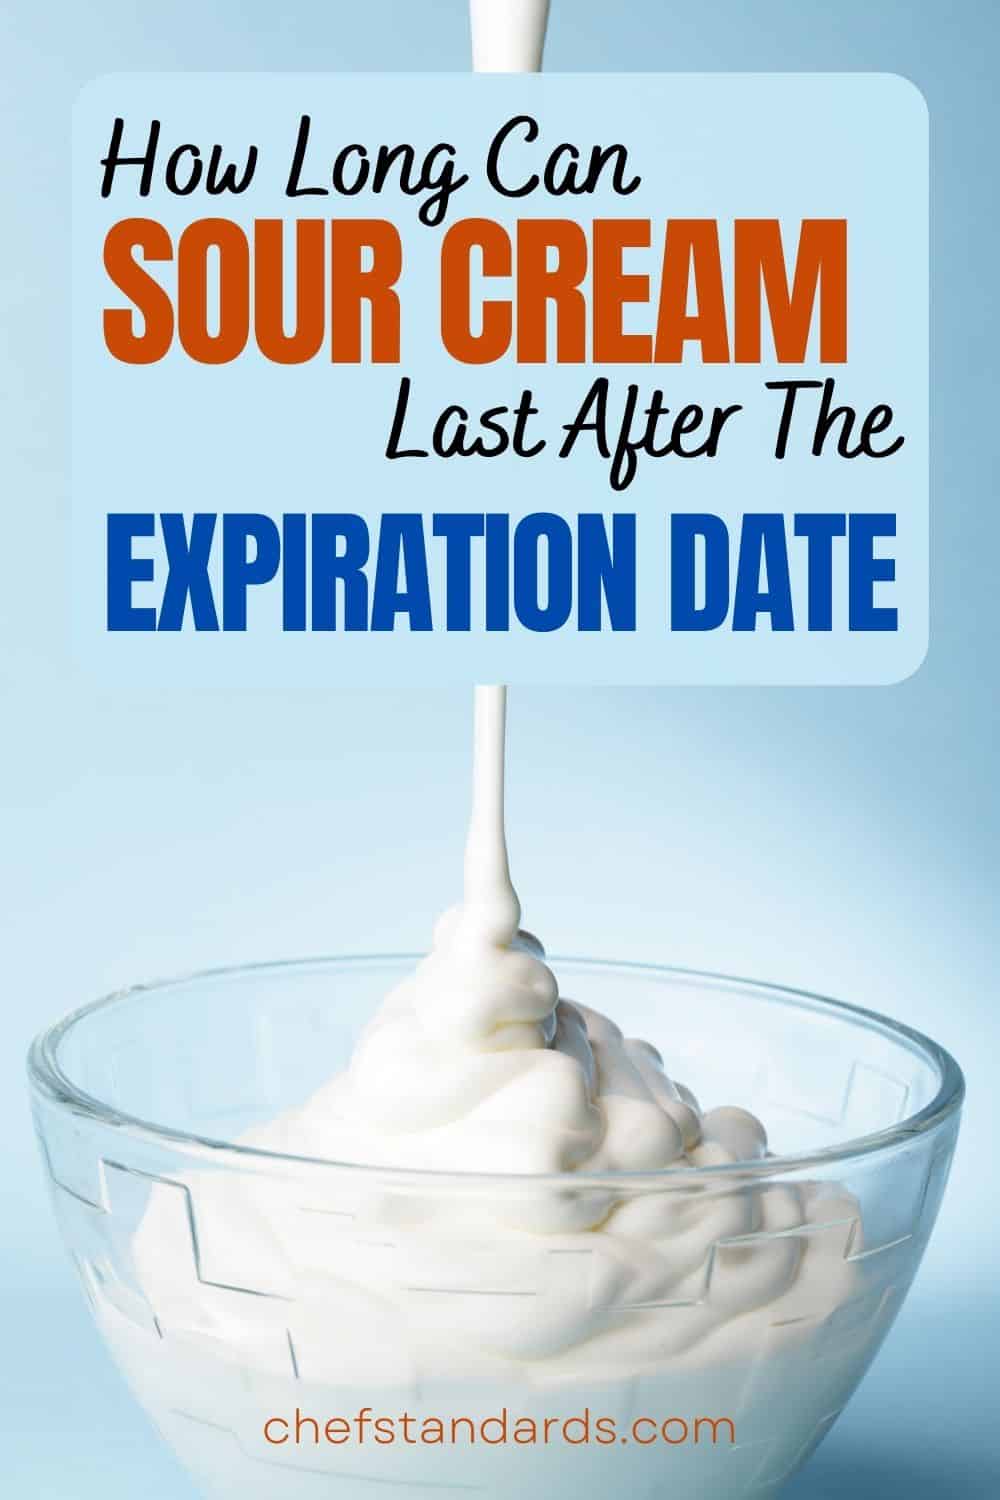 How Long Is Sour Cream Good After The Expiration Date